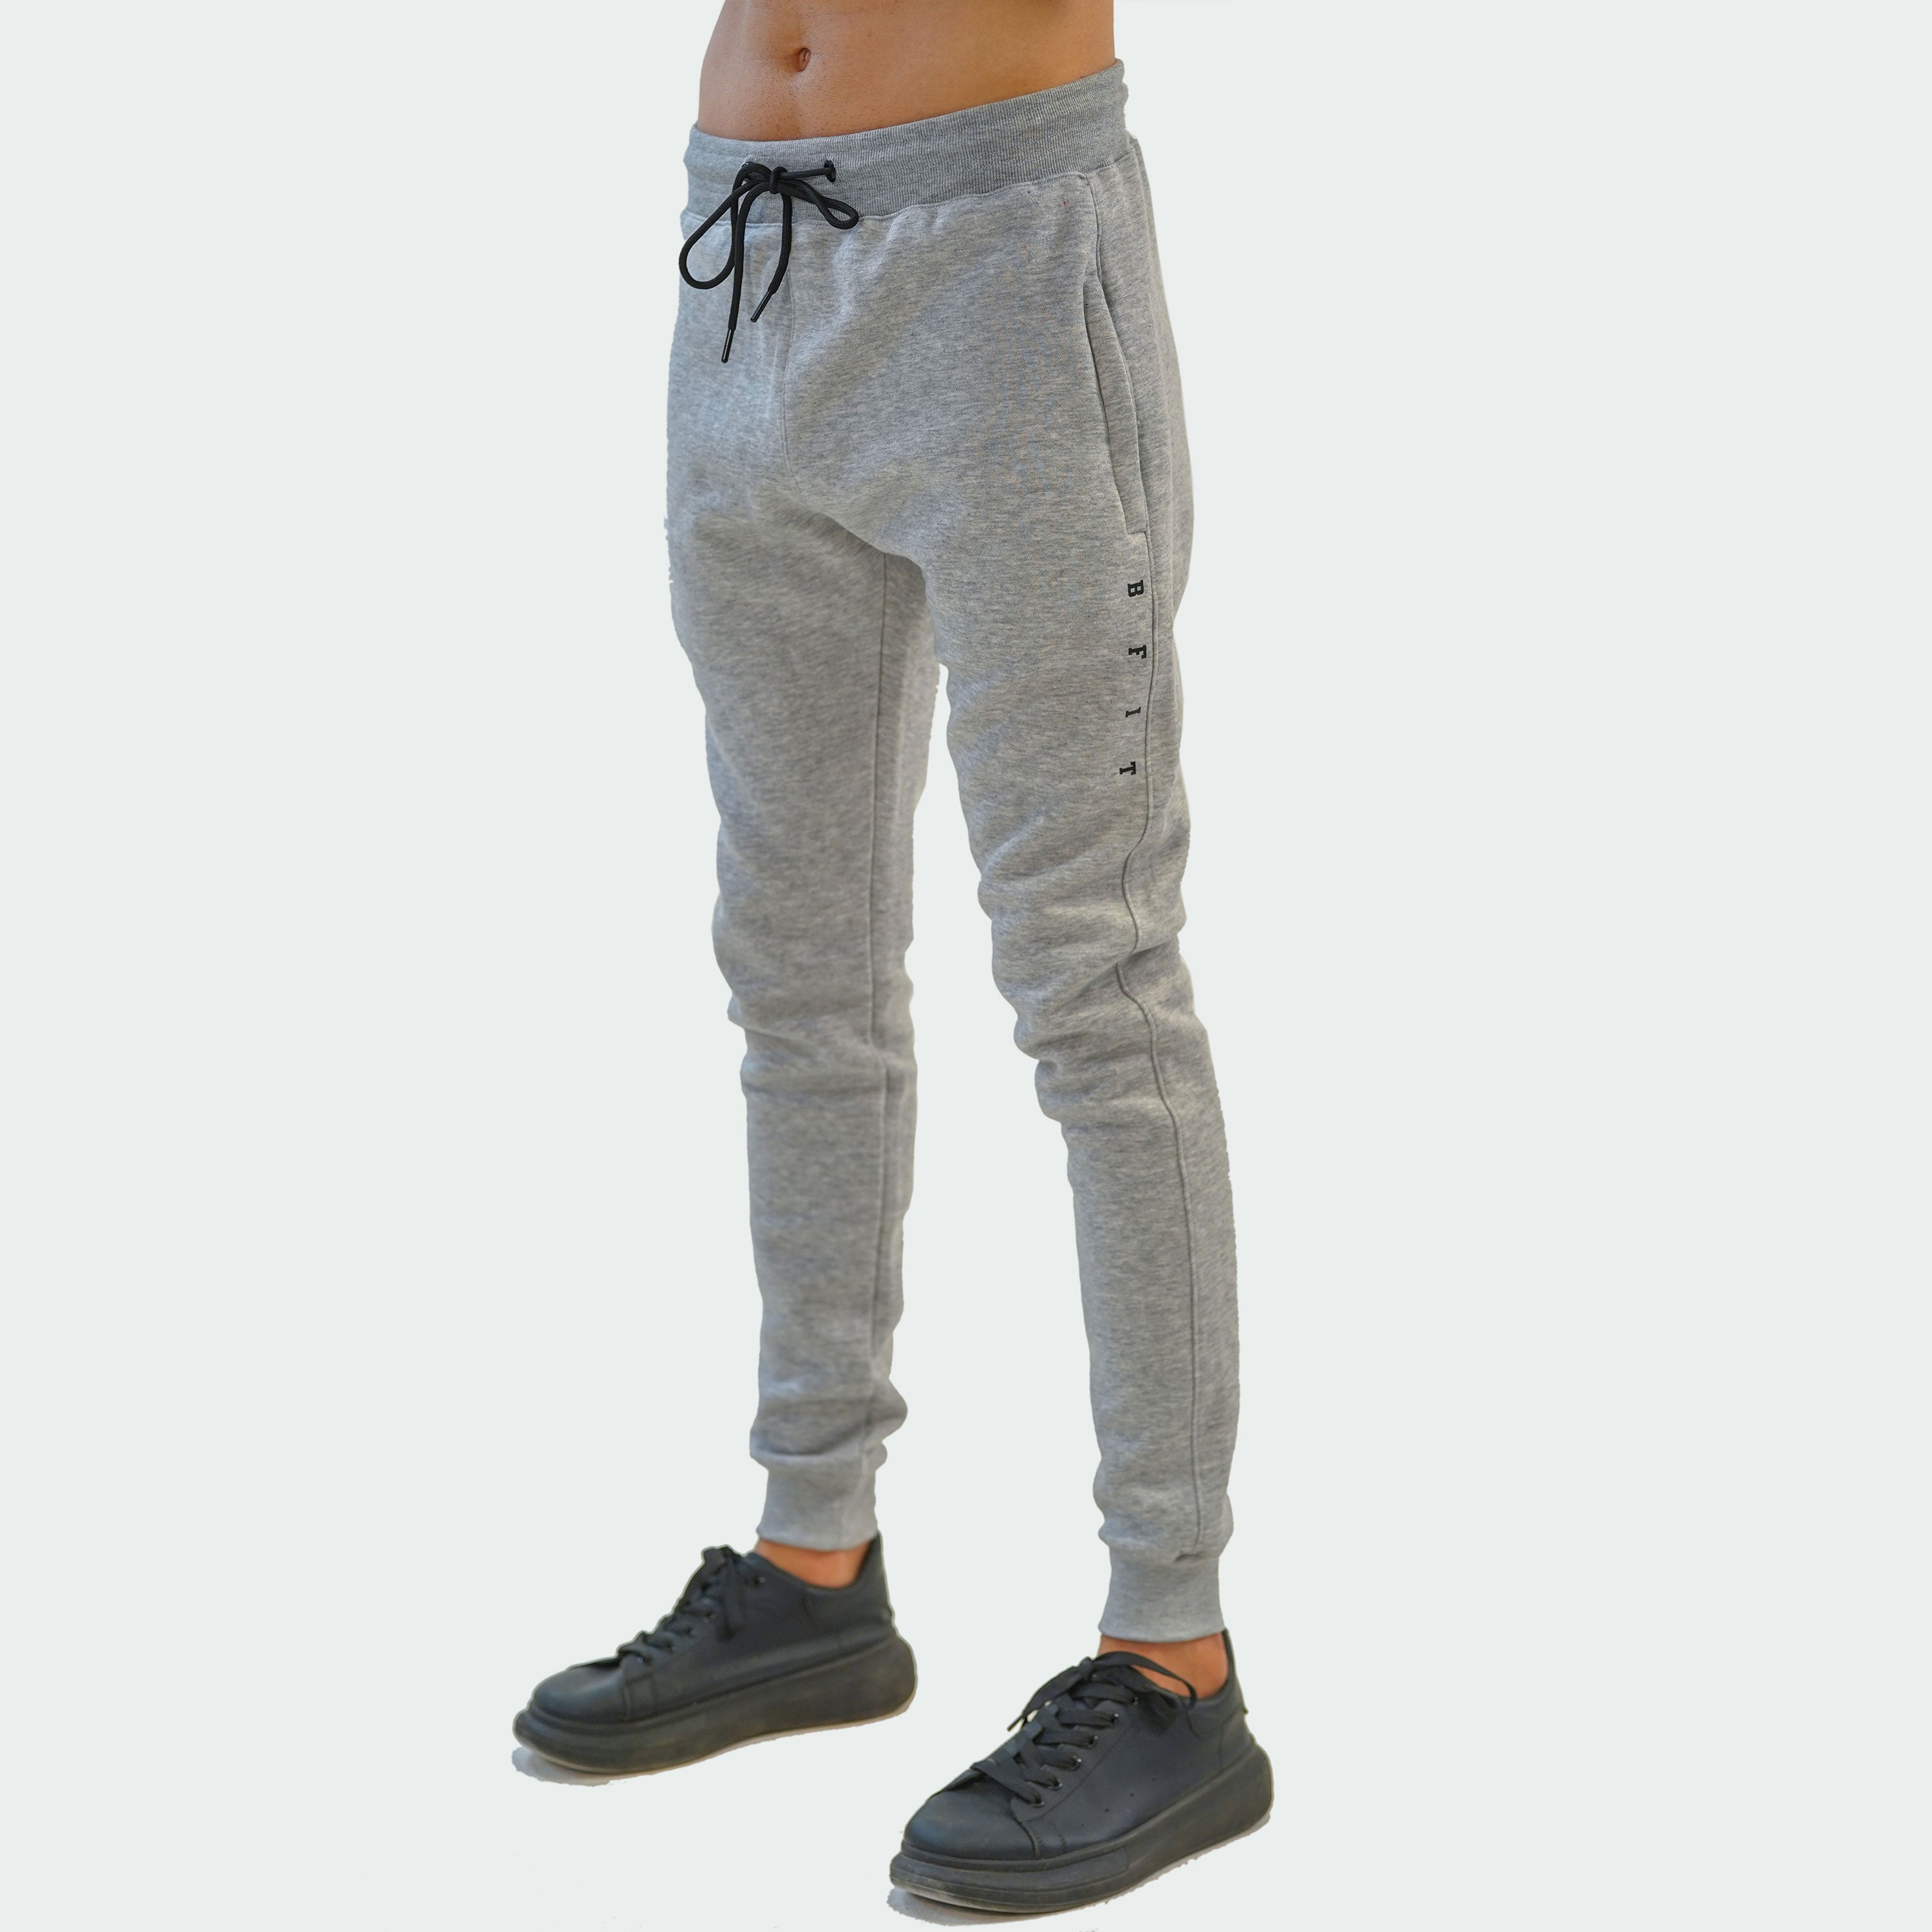 Comfy Warm Trousers - Grey